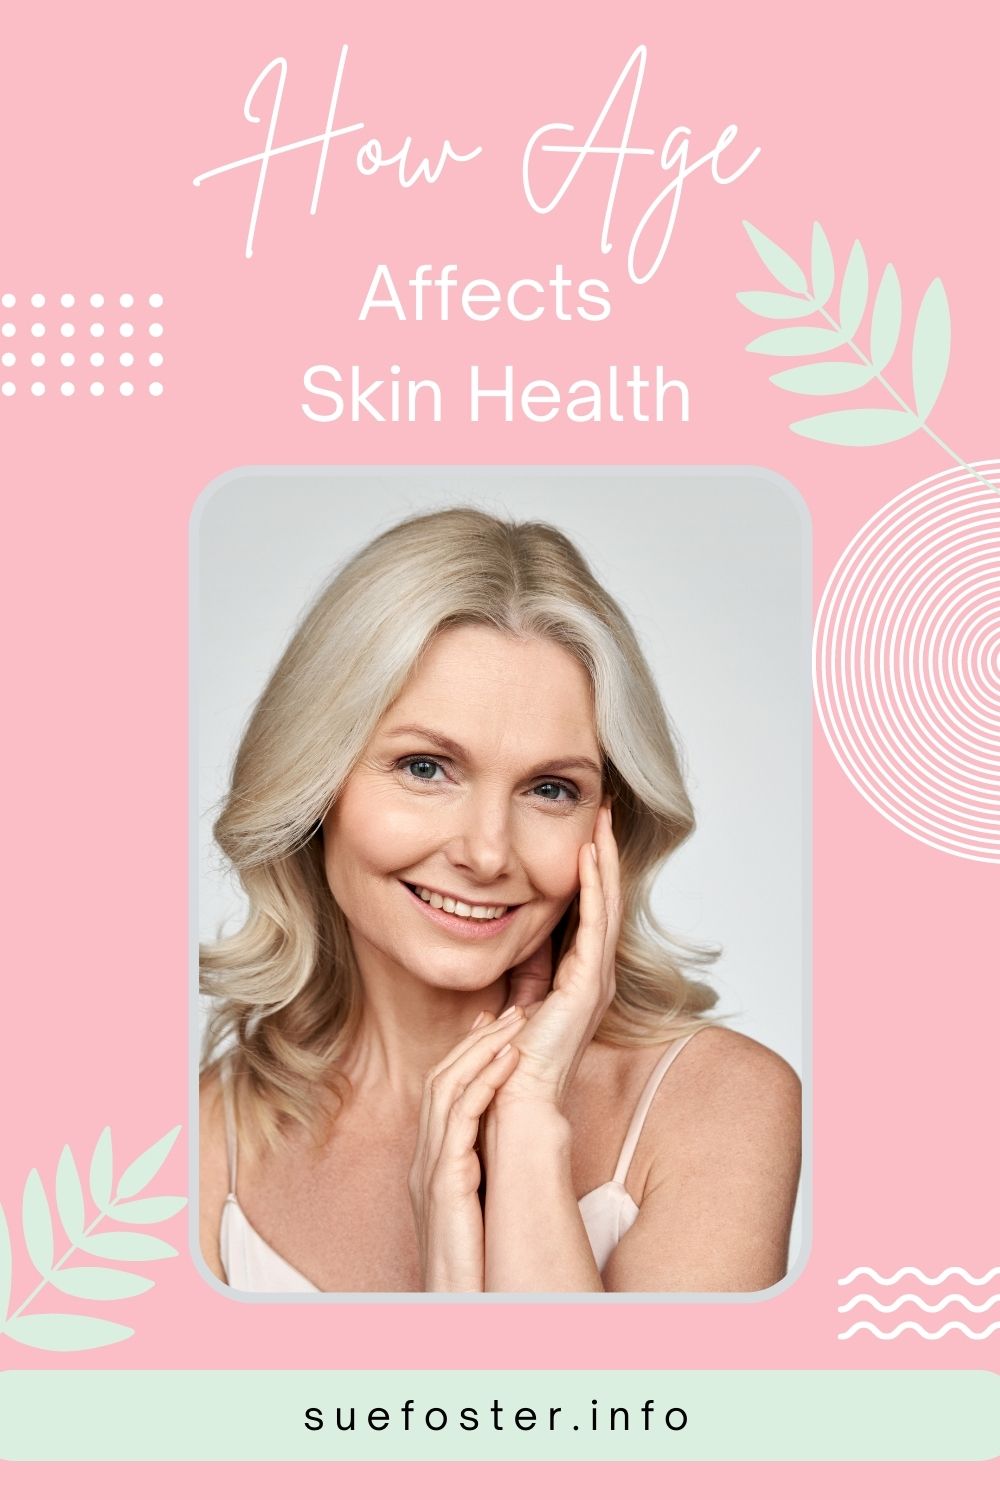 Your skin deteriorates as you age. Thankfully, you can decrease those effects by following these tips.